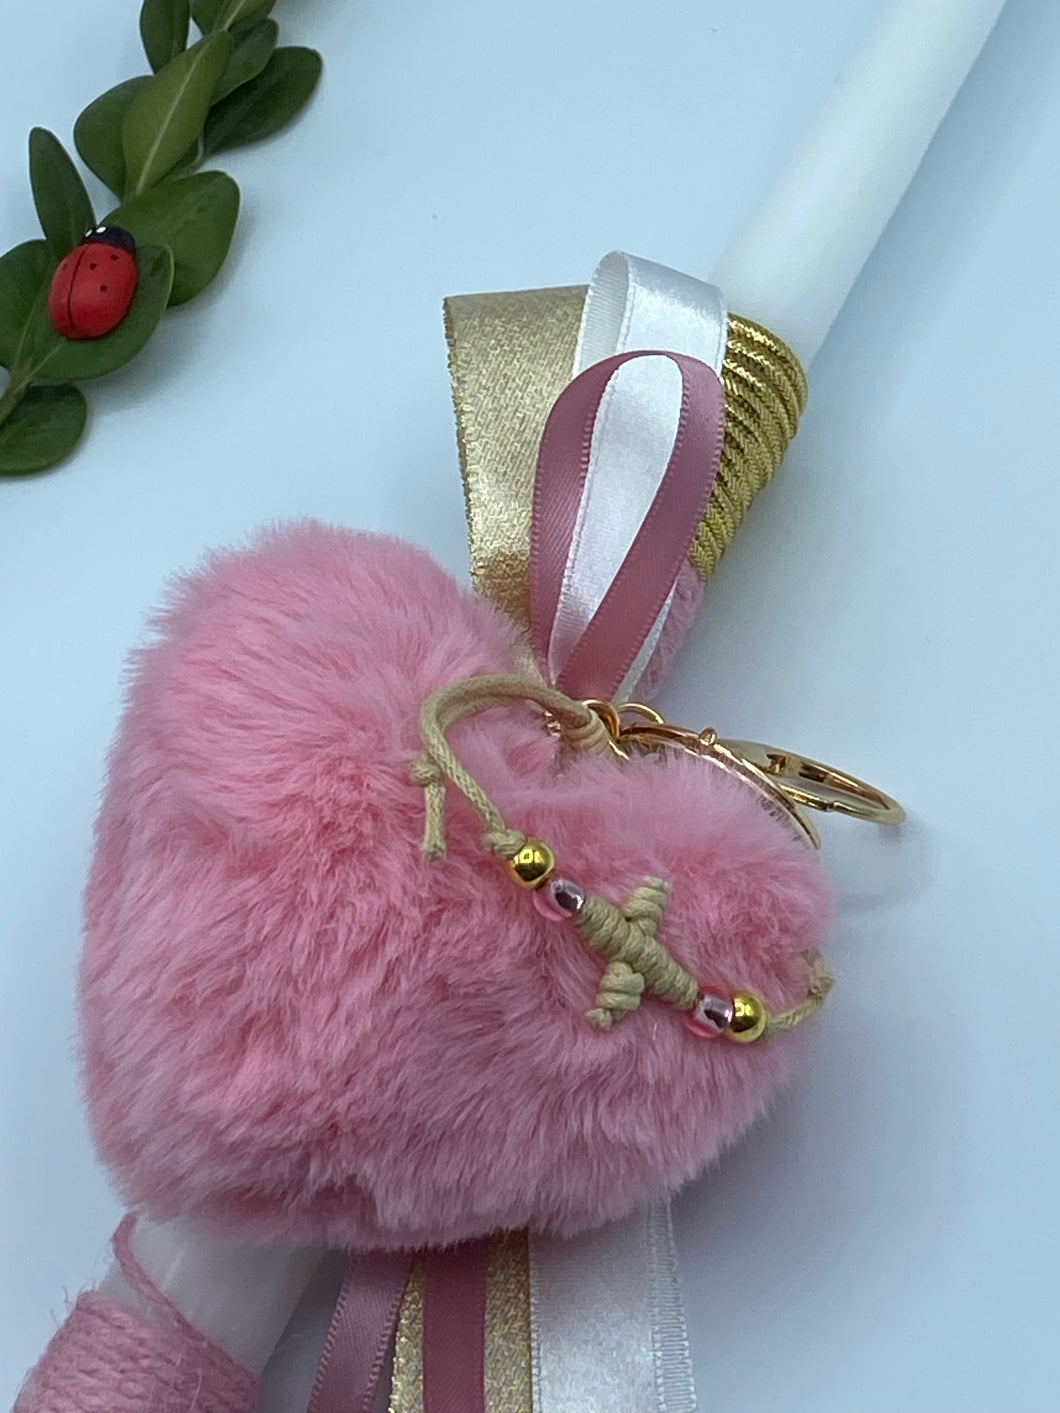 Corded Easter Candle with Heart PomPom Keychain and Adjustable Cross Bracelet EC202213